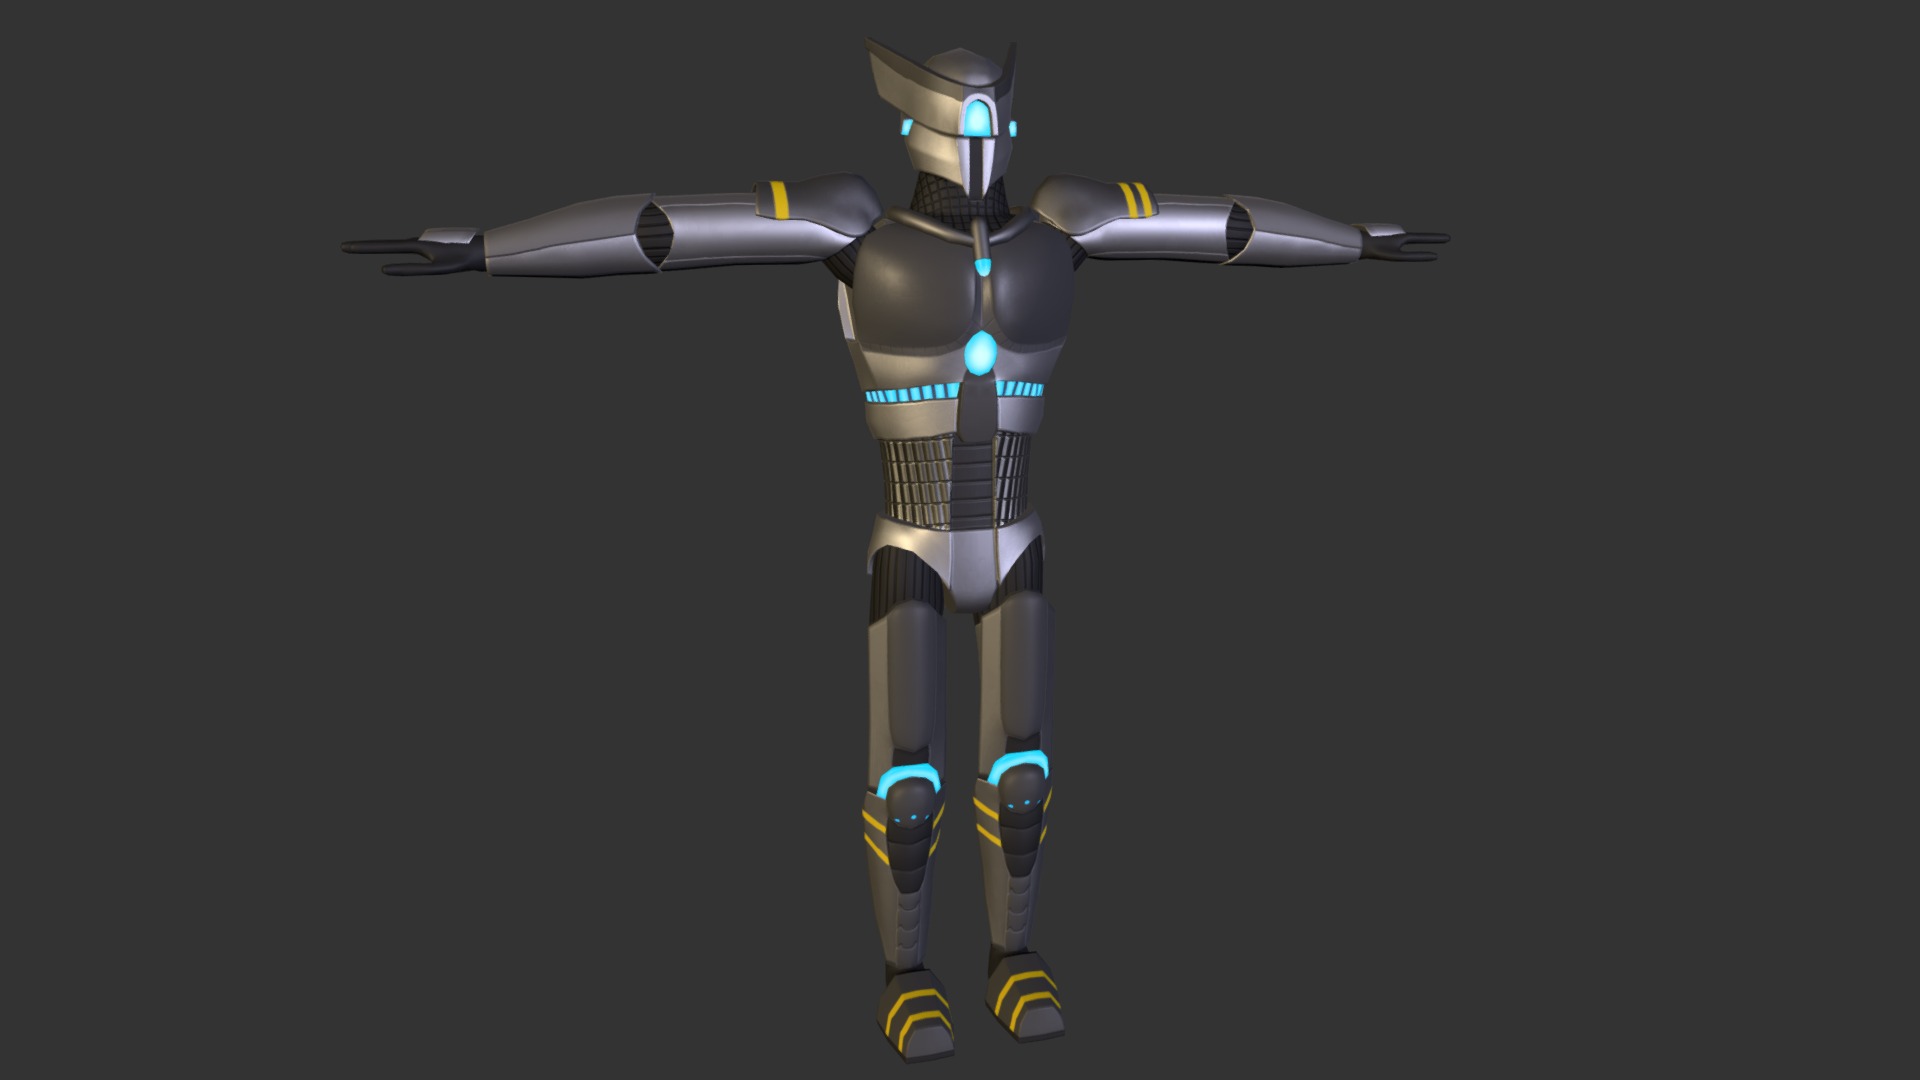 Part of the Robot Pack for Aero set, this is the Aero Main model which is a biped robot character. Mainly designed as a security robot 3d model